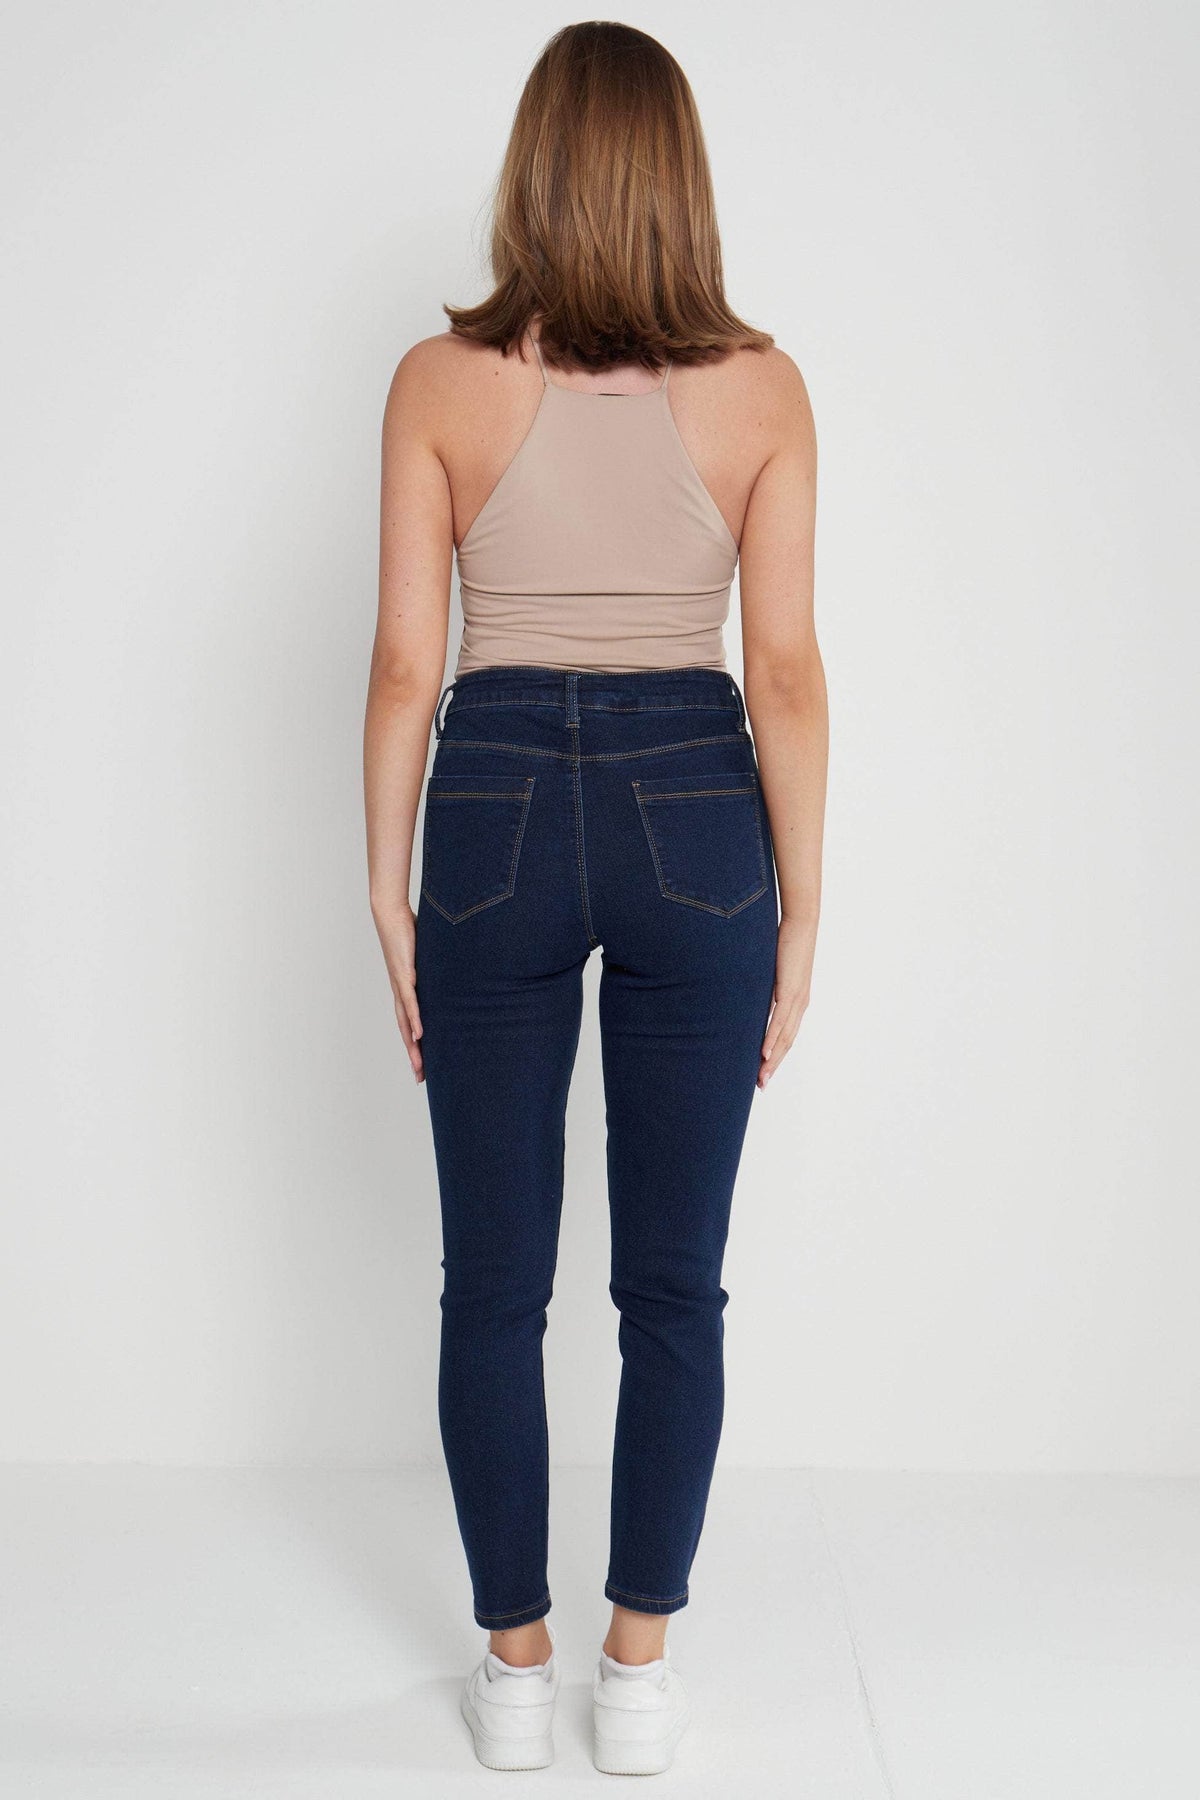 Saloos Trousers Tapered Mid-High Waist Jeans